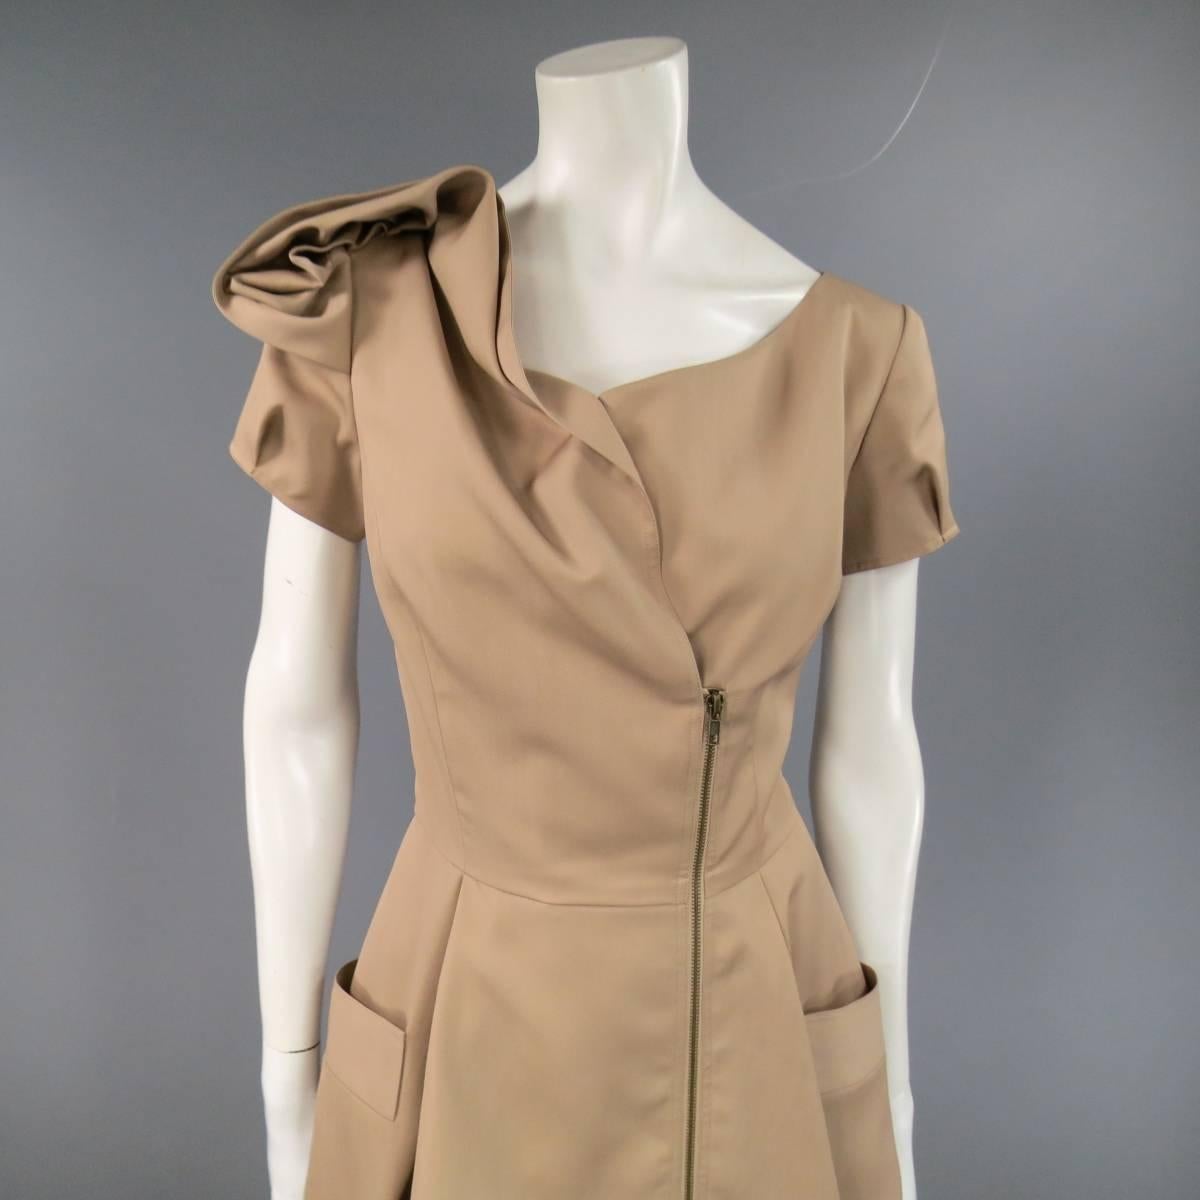 This fabulous OSCAR DE LA RENTA cocktail dress comes in a camel beige wool silk blend twill and features an asymmetrical zip closure, curved neckline, pleated short sleeves, a line pleated skirt, and gorgeous shoulder embellishment. Made in USA.
